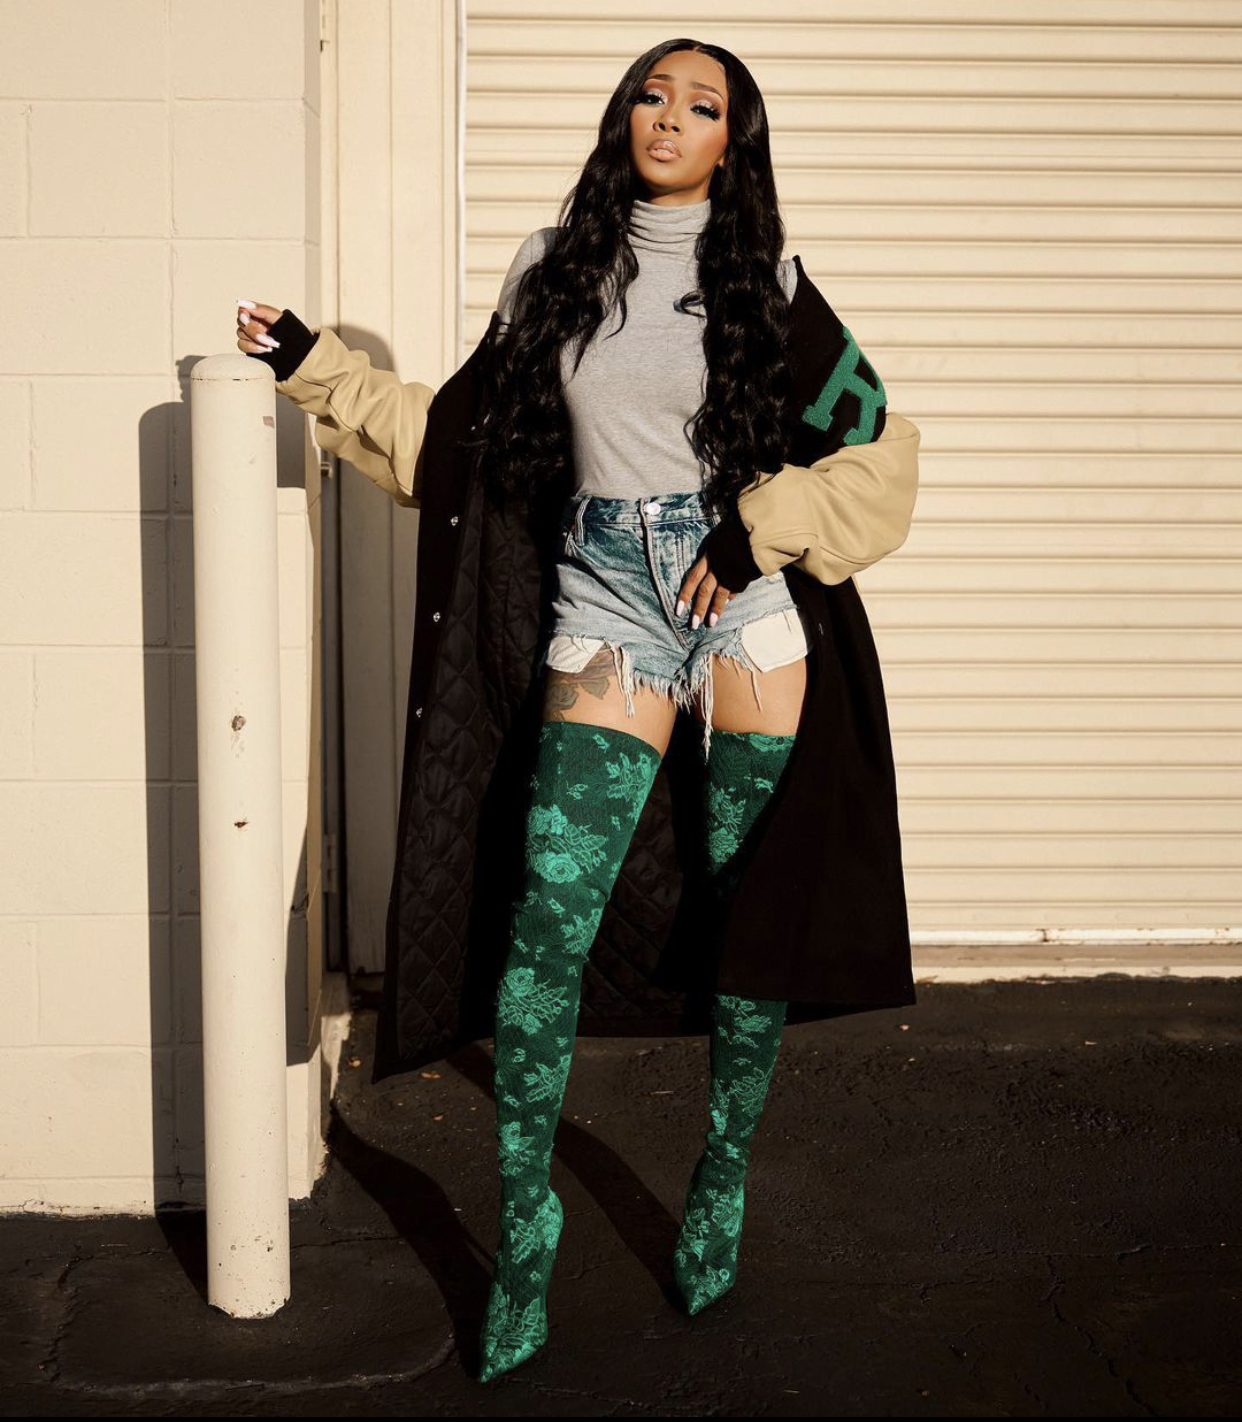 You We Answer! Rocks a $2,407 Raf Simons FW20 American Letterman Jacket and Balenciaga Green Floral Lace Thigh High